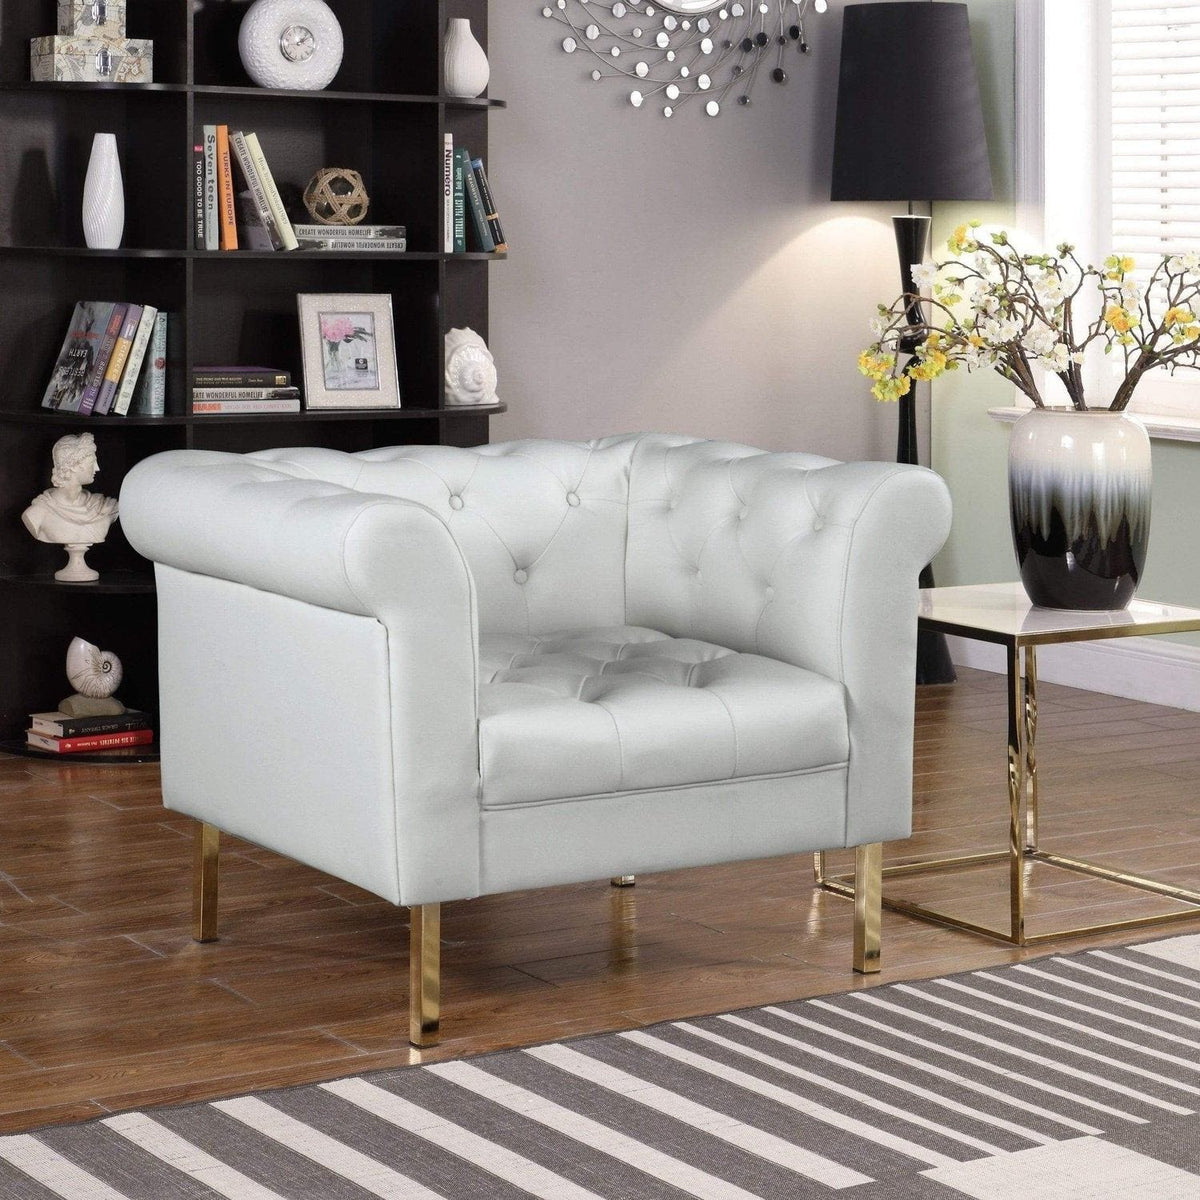 Iconic Home Giovanni Tufted PU Leather Club Chair Cream